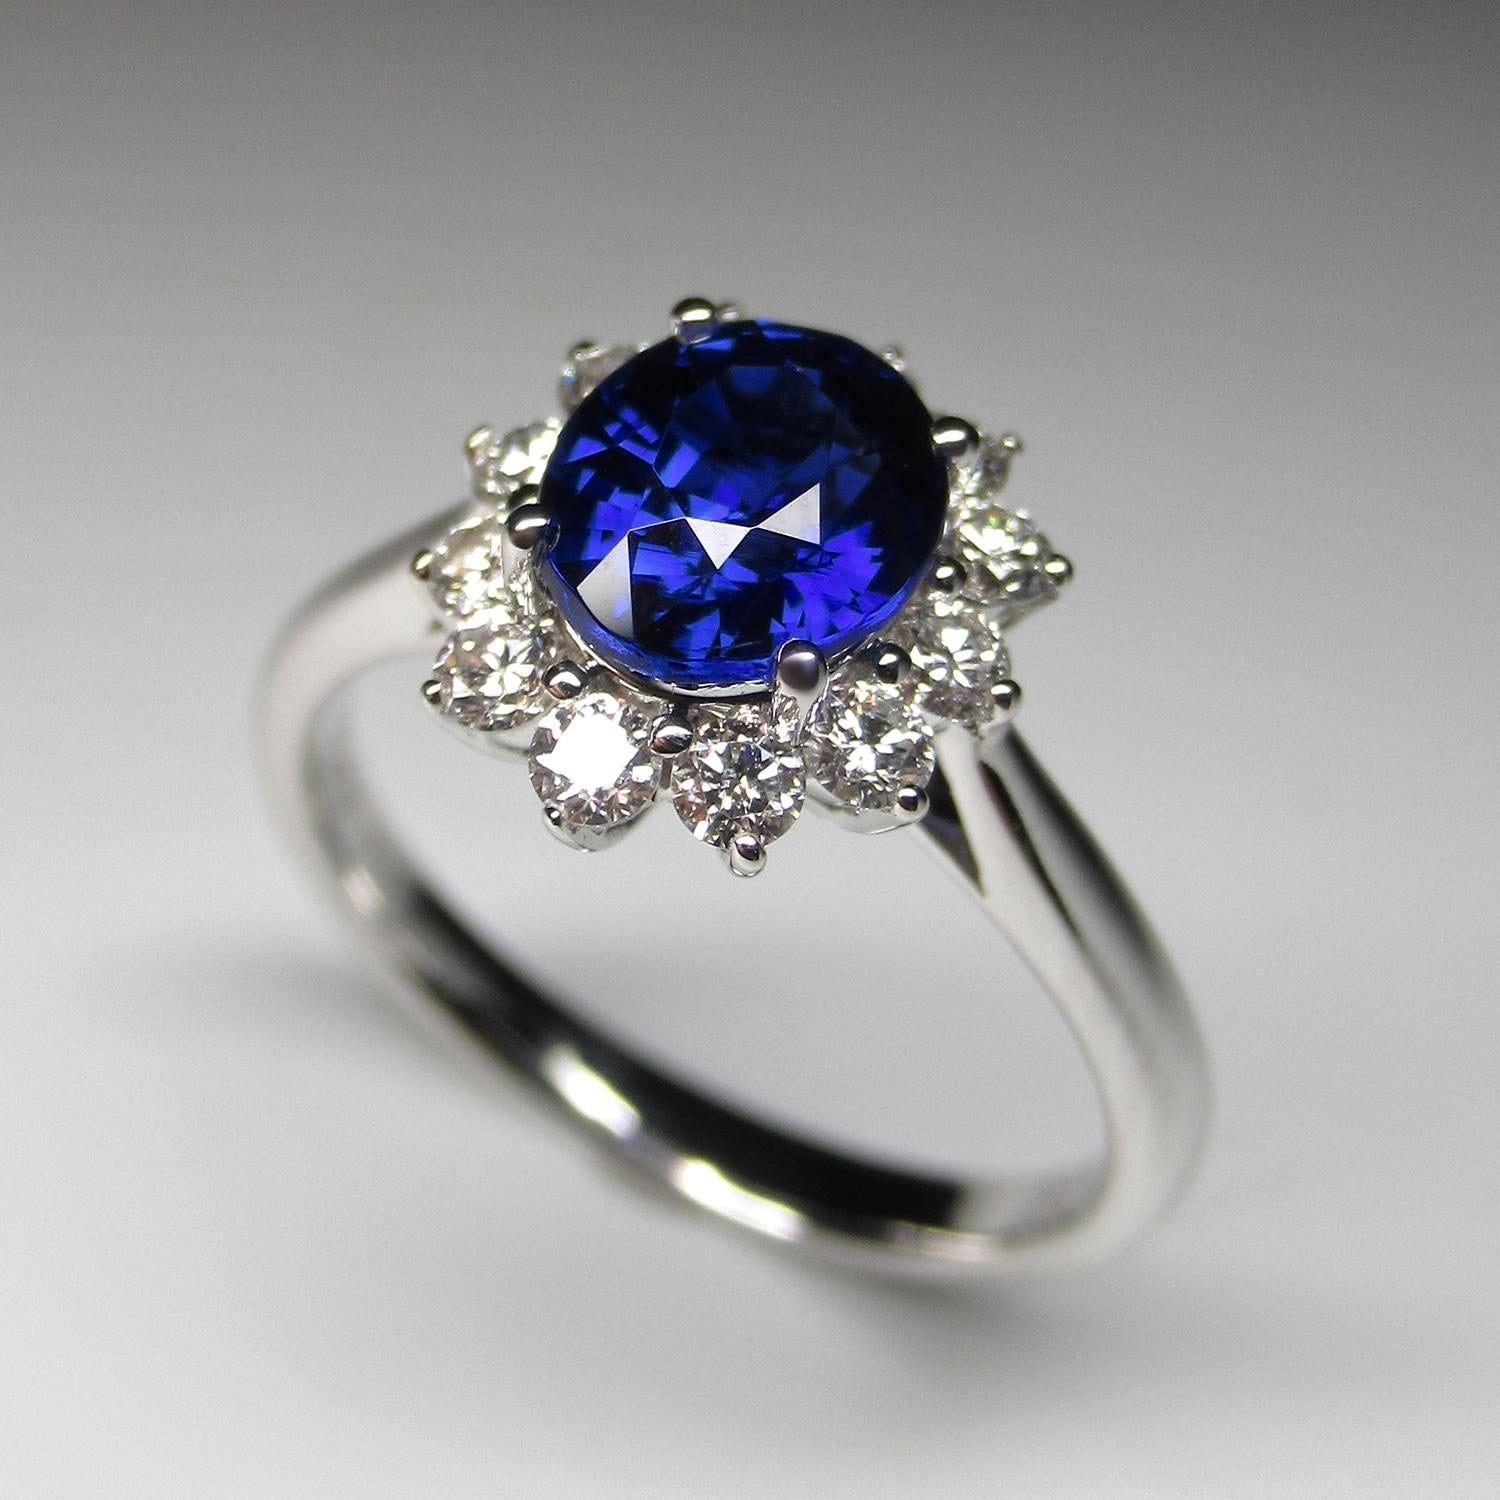 Russian Empire Sapphire Royal Blue Princess Diana Diamond Style Gold Ring St Valentine's Gift